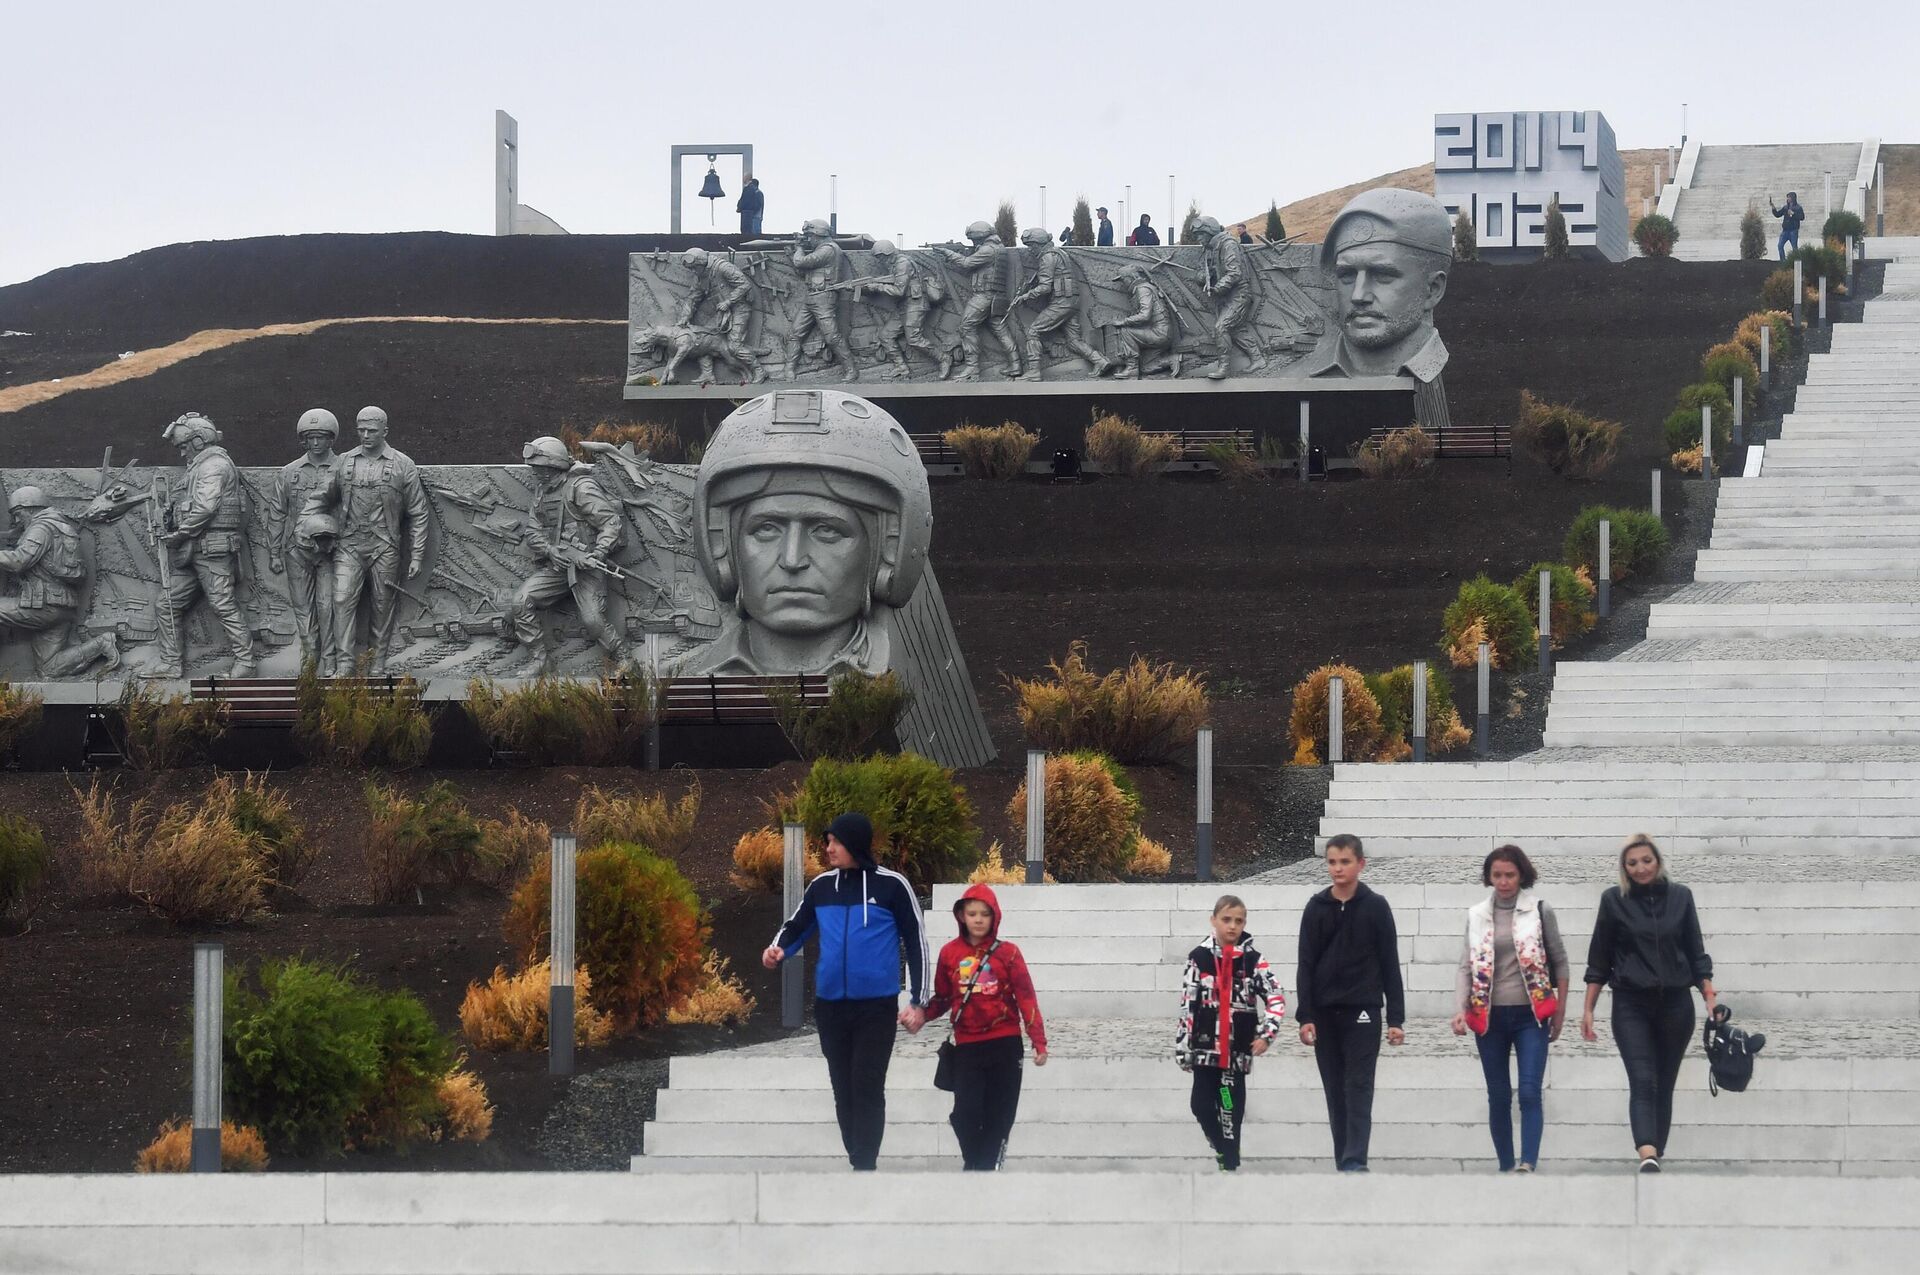 People walk down the stairs at the Savur-Mogyla war memorial complex with a bas-relief of Vladimir Zhoga, leader of the Sparta Battalion rebel military group in the Donetsk People's Republic (DPR), seen in the background, as Russia's military operation in Ukraine continues, near the city of  Snezhnoe, Donetsk People's Republic - Sputnik International, 1920, 31.12.2022